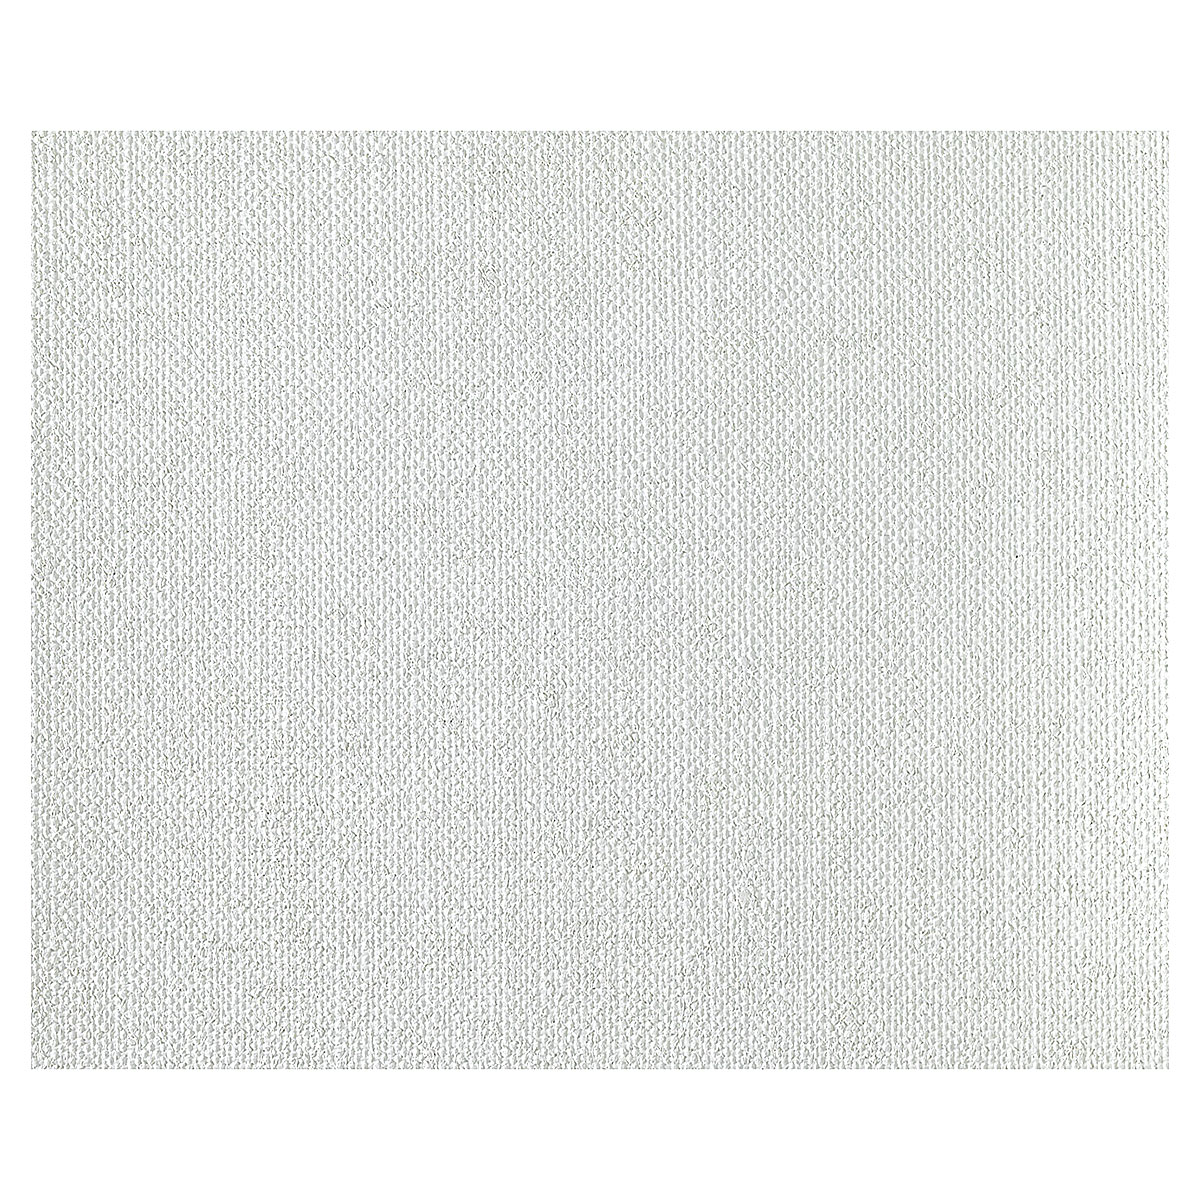 Loxley Canvas Roll – 100% Linen Clear Primed – loxleyarts.co